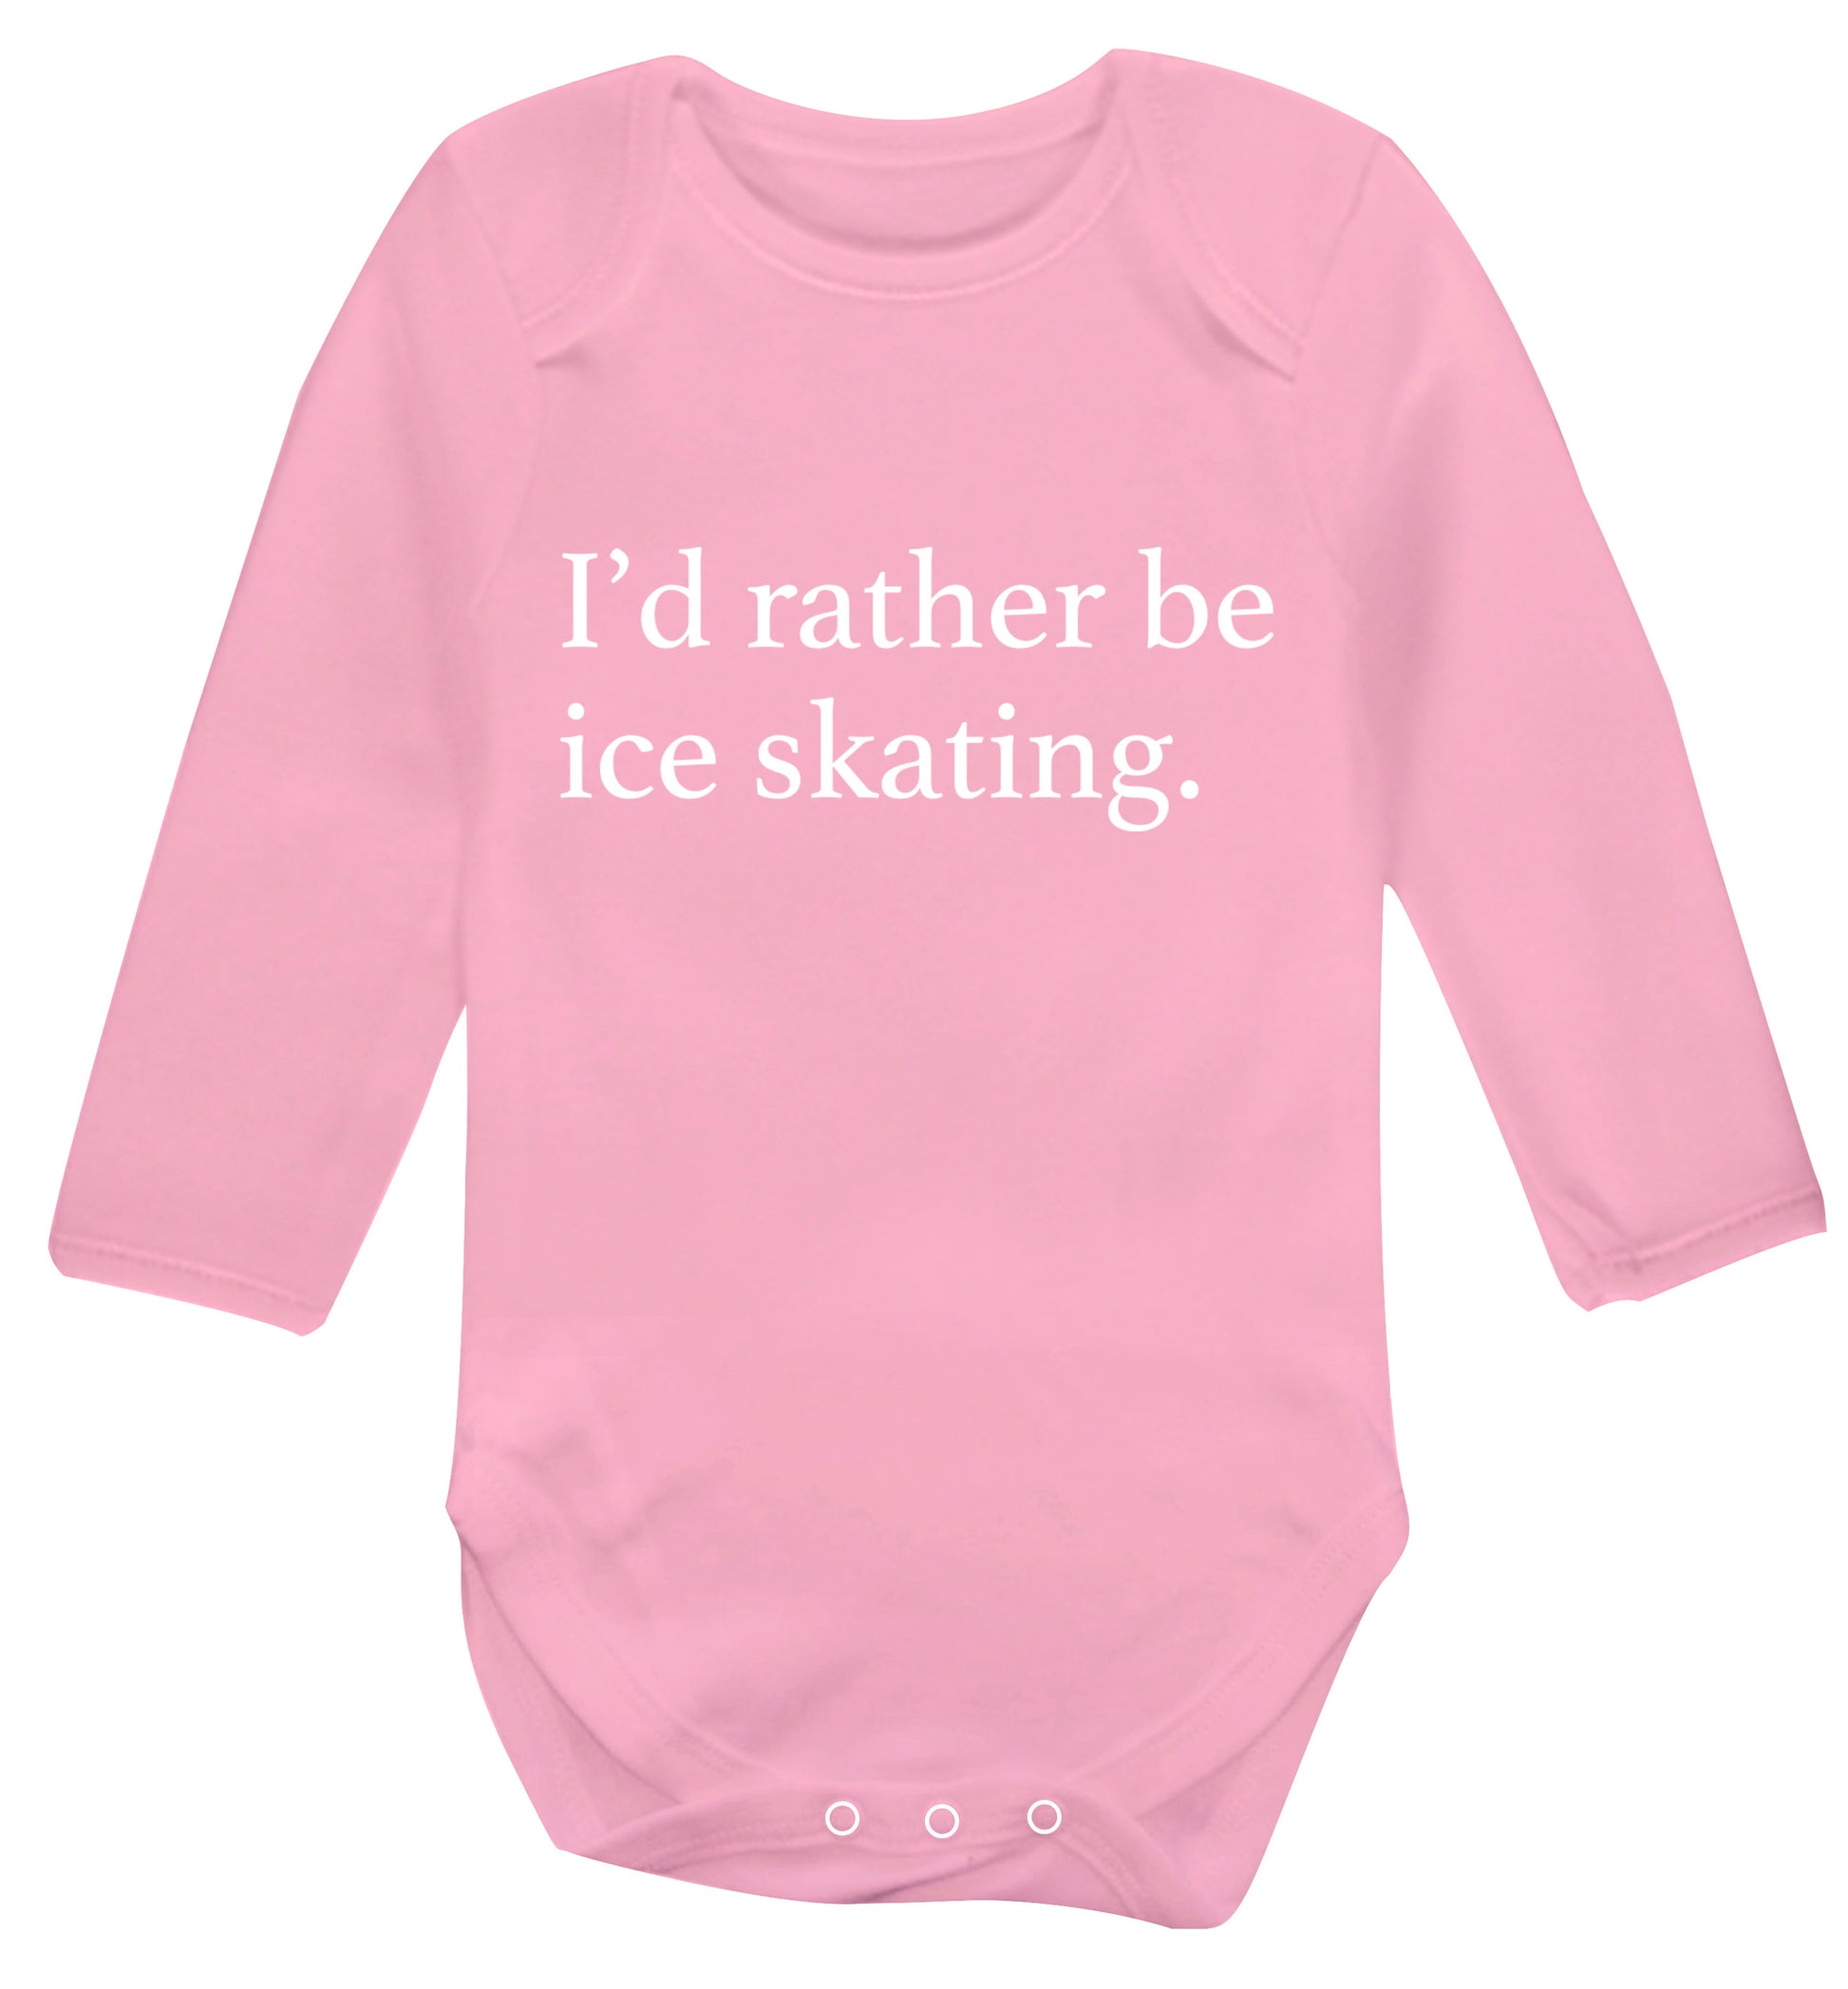 I'd rather be ice skating Baby Vest long sleeved pale pink 6-12 months